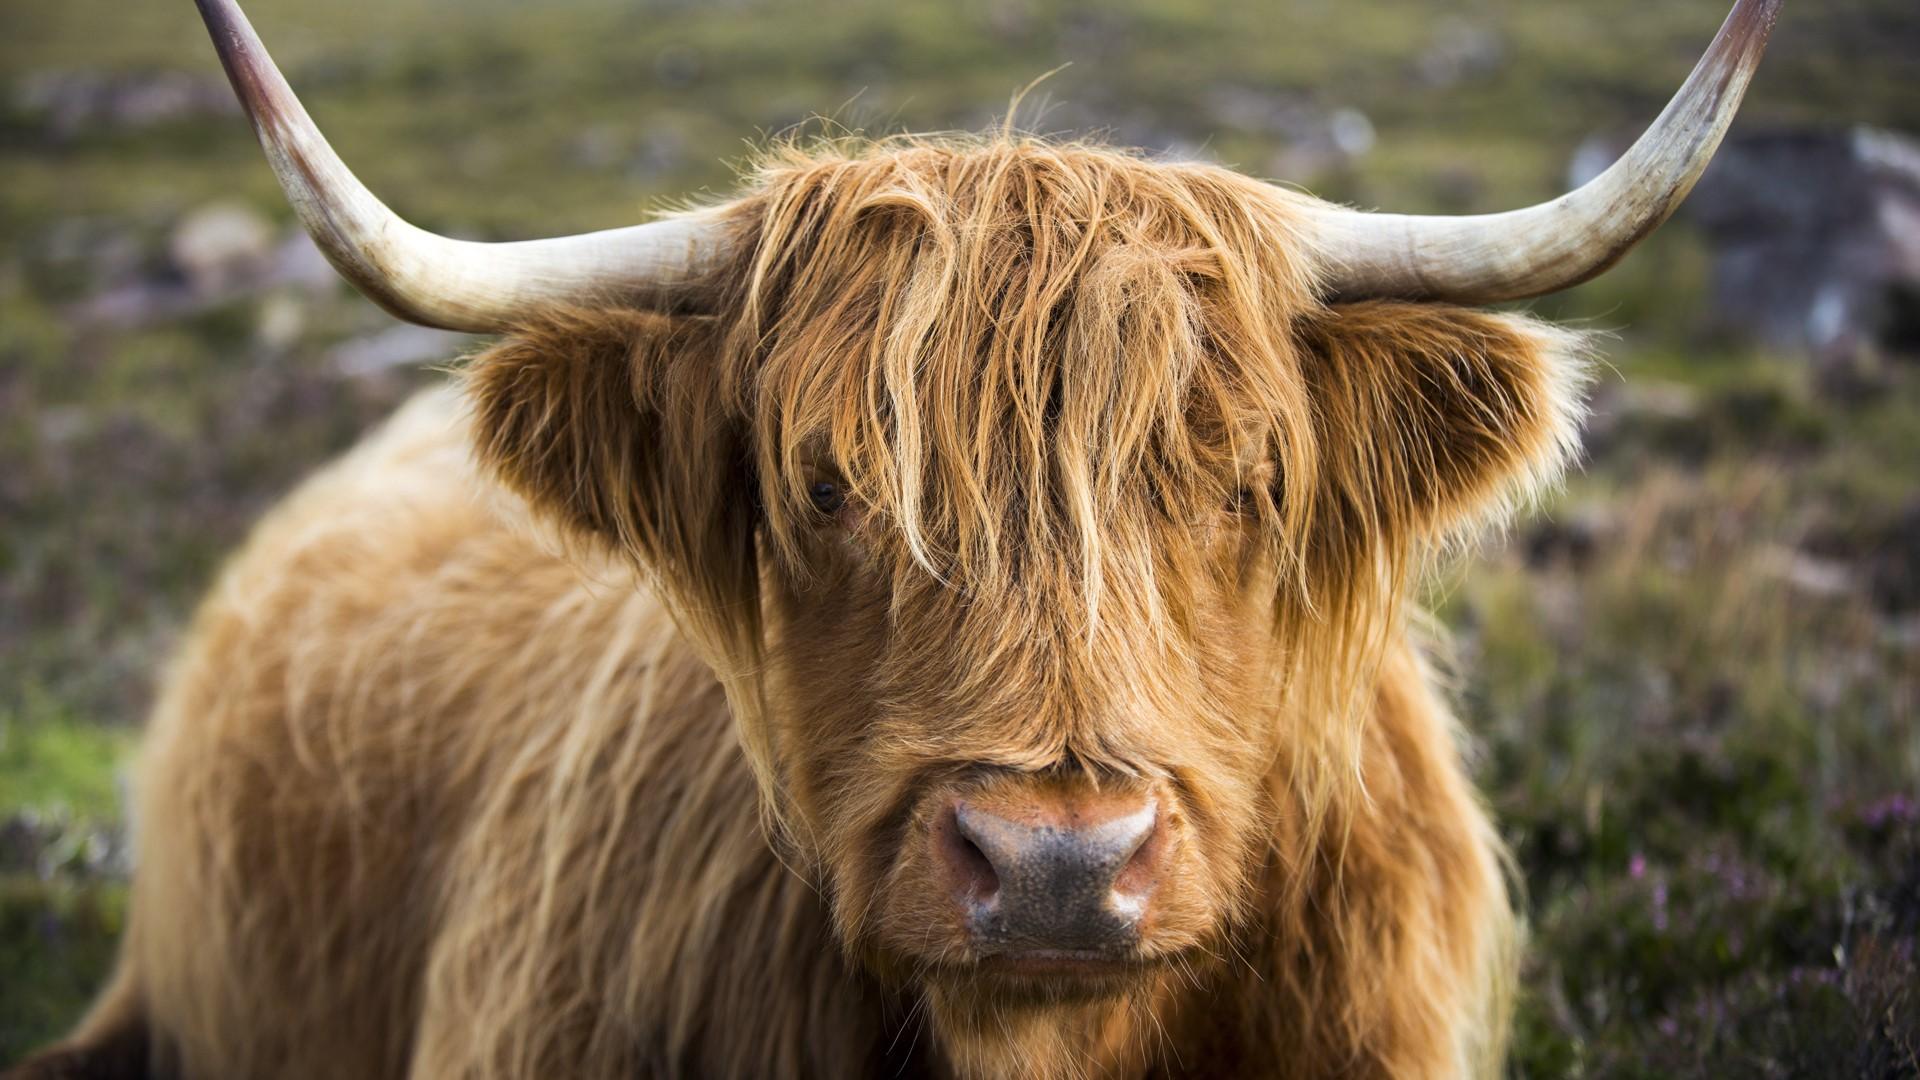 Highland Cow Wallpapers Uk ✓ Fitrini’s Wallpapers